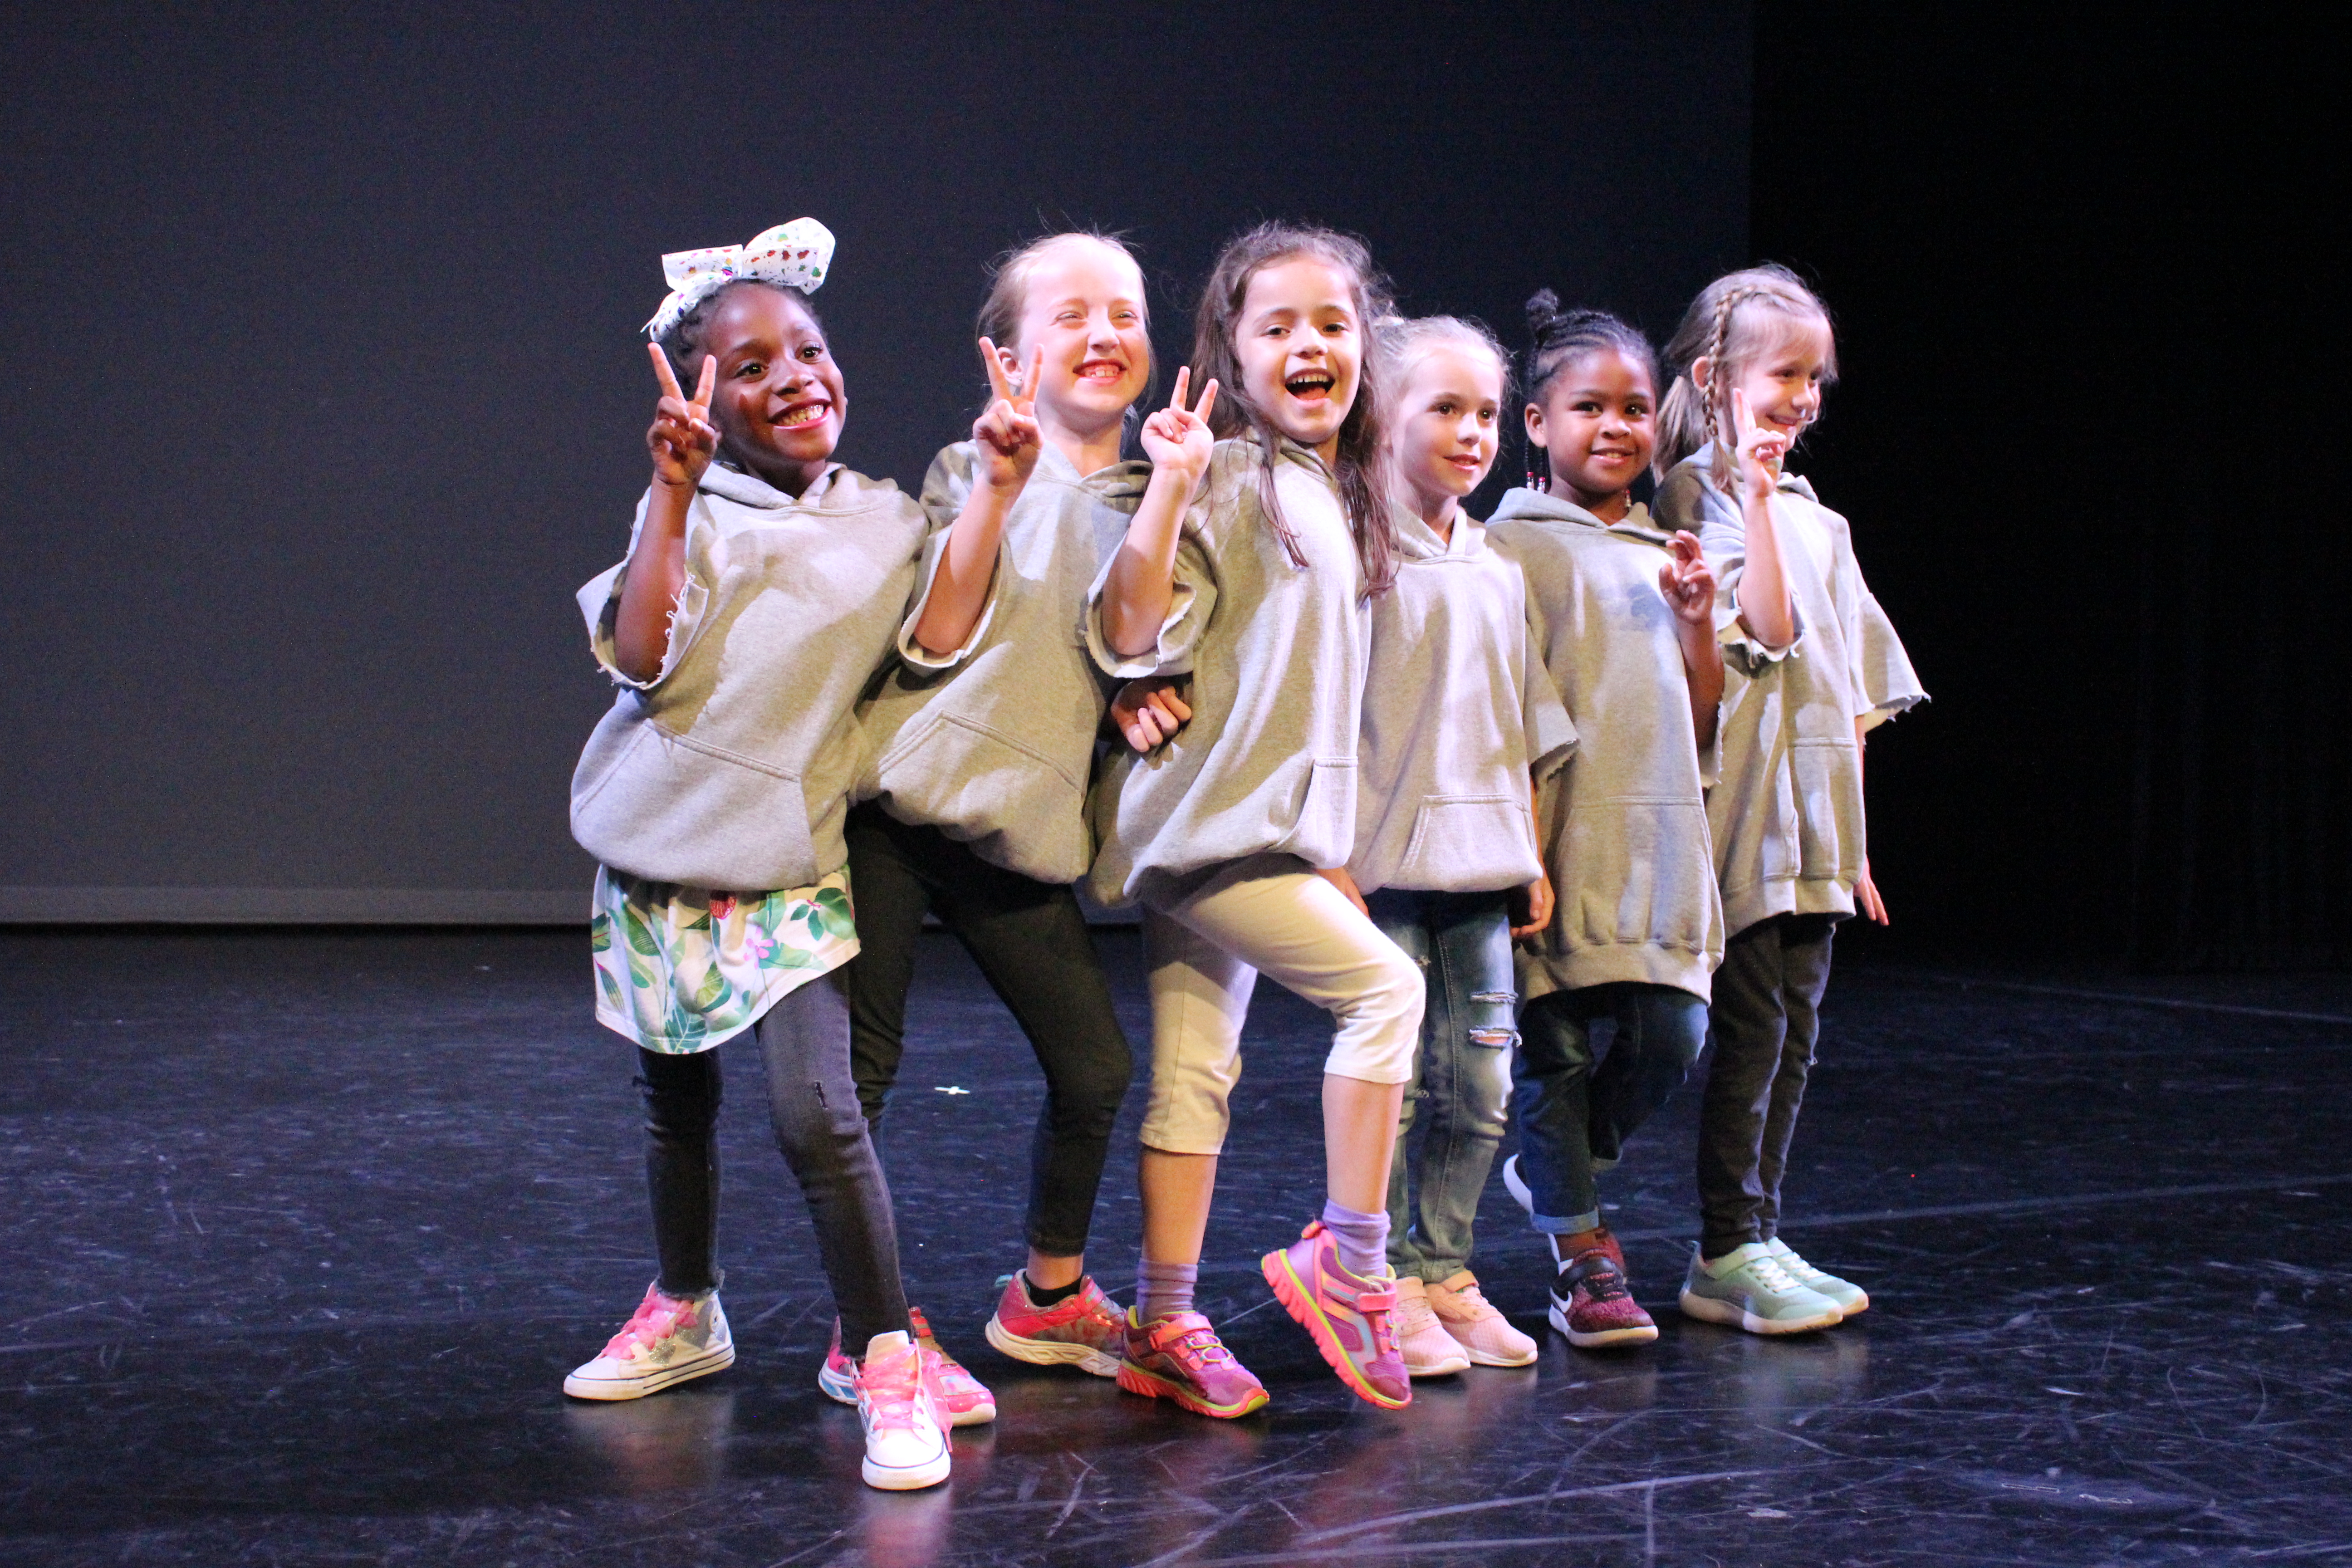 image depicting a group of young students on the stage